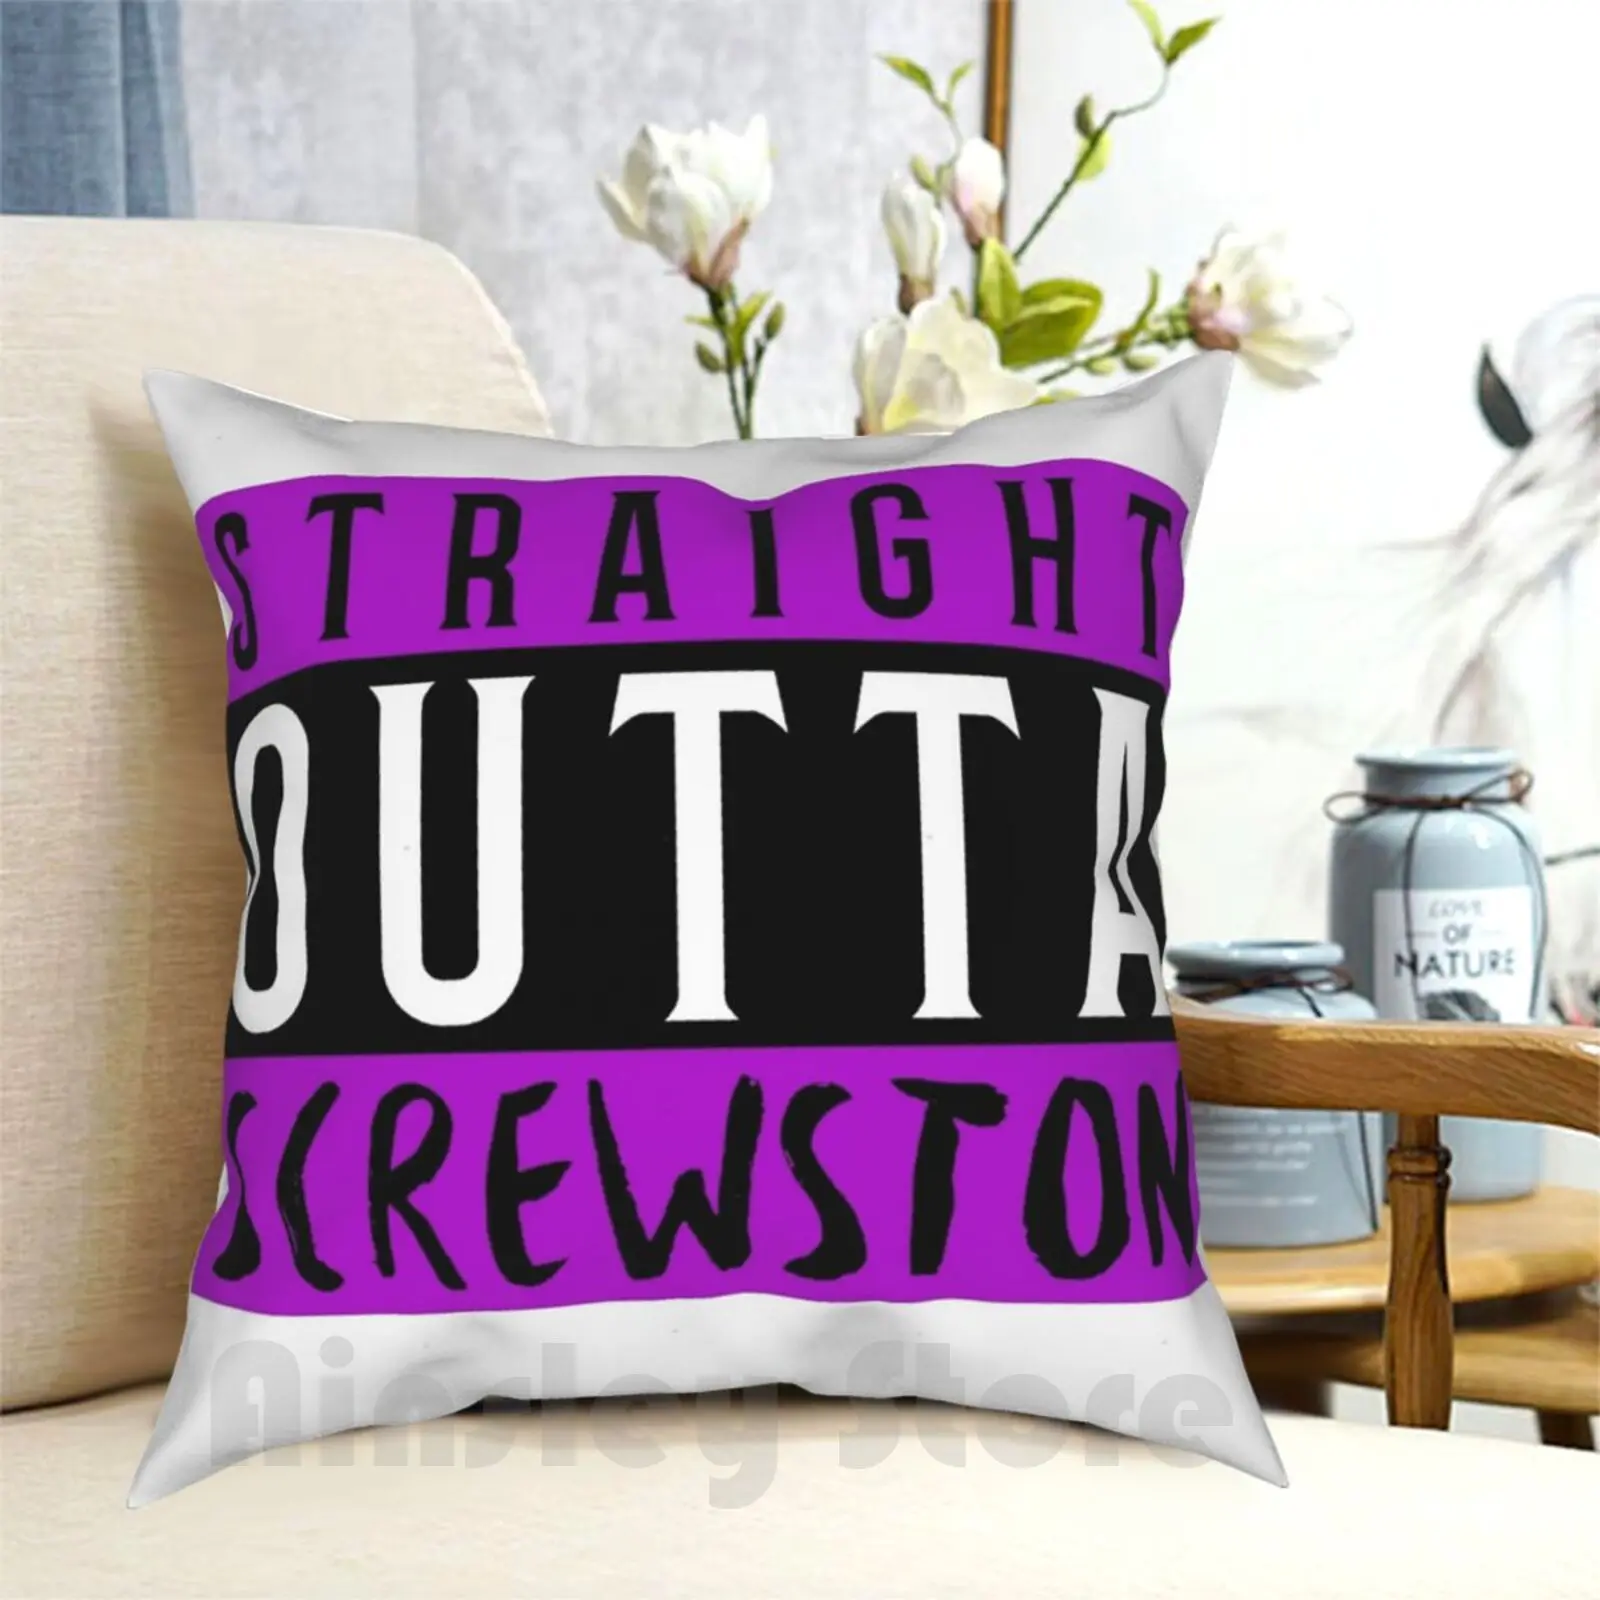 

Straight Outta Screwston Pillow Case Printed Home Soft DIY Pillow cover Bayou City Houston Space City H Town City Texas